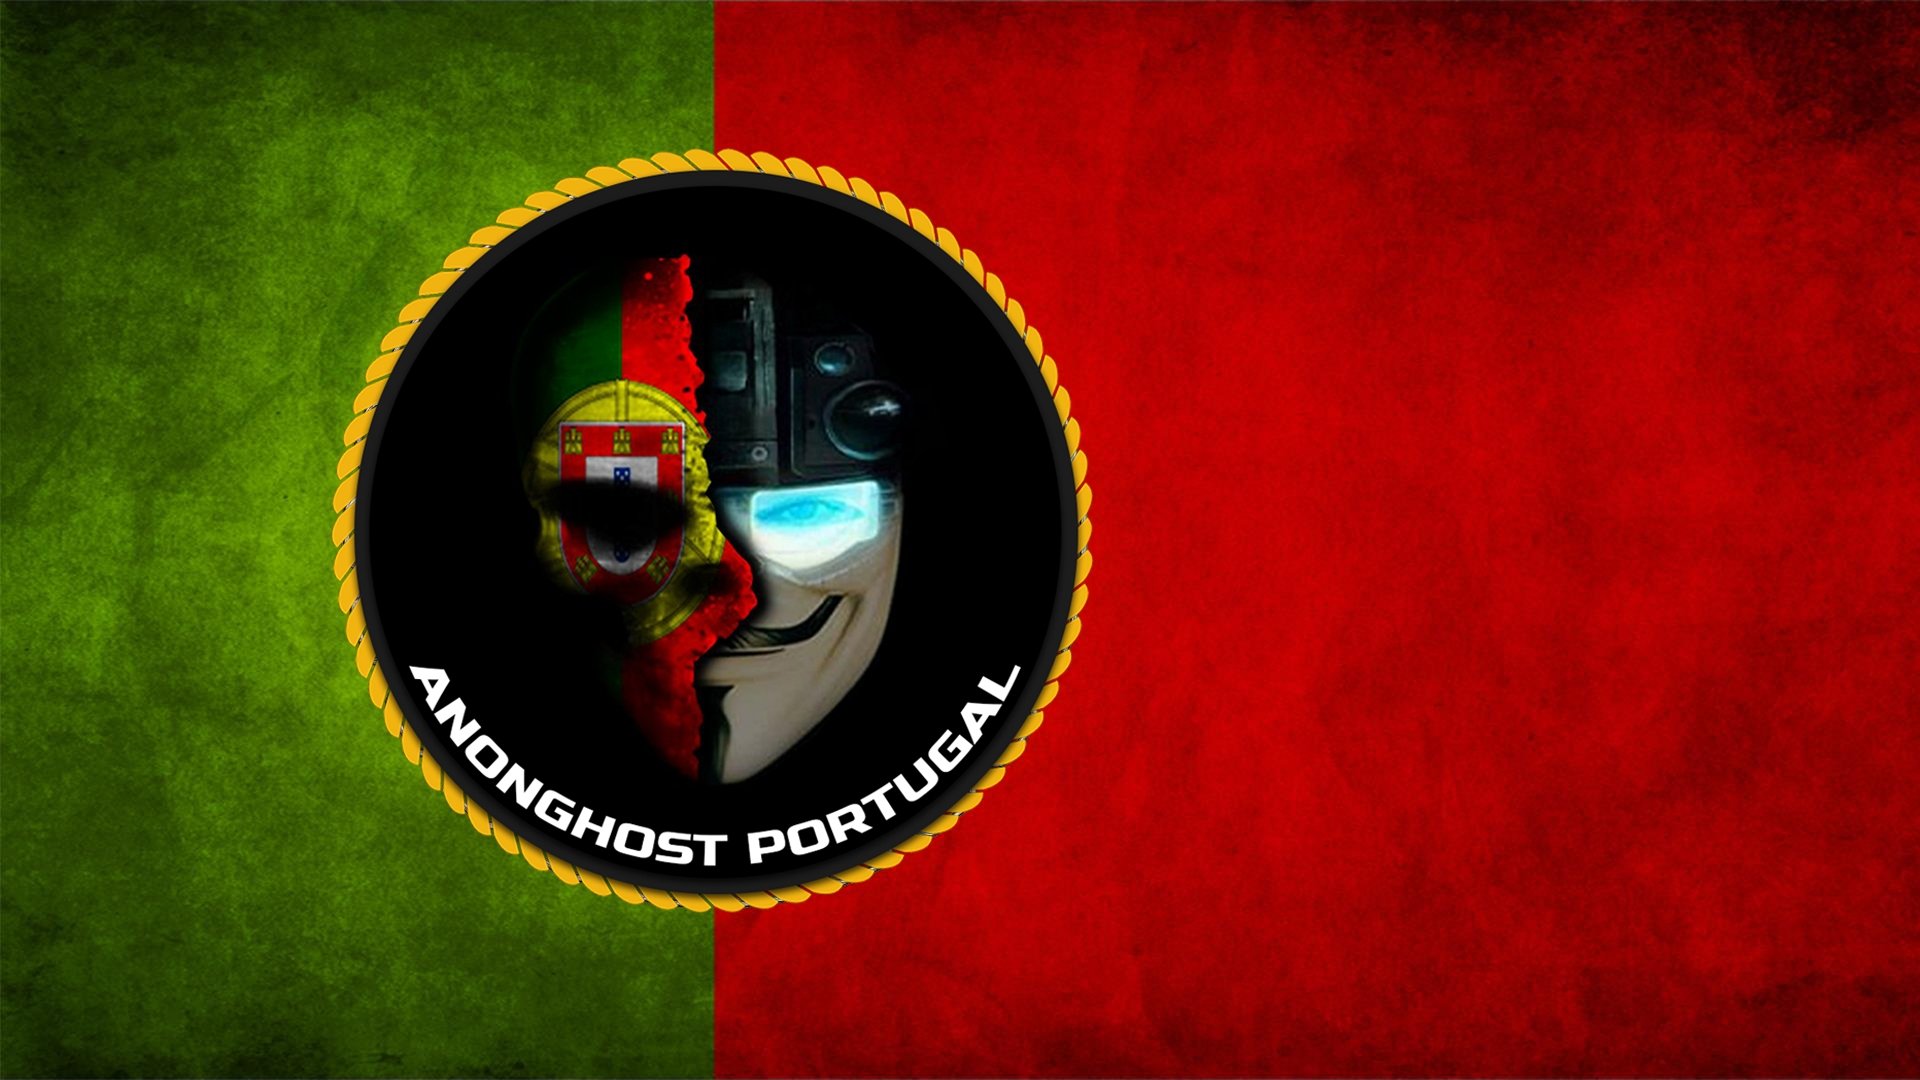 AnonGhost Portugal